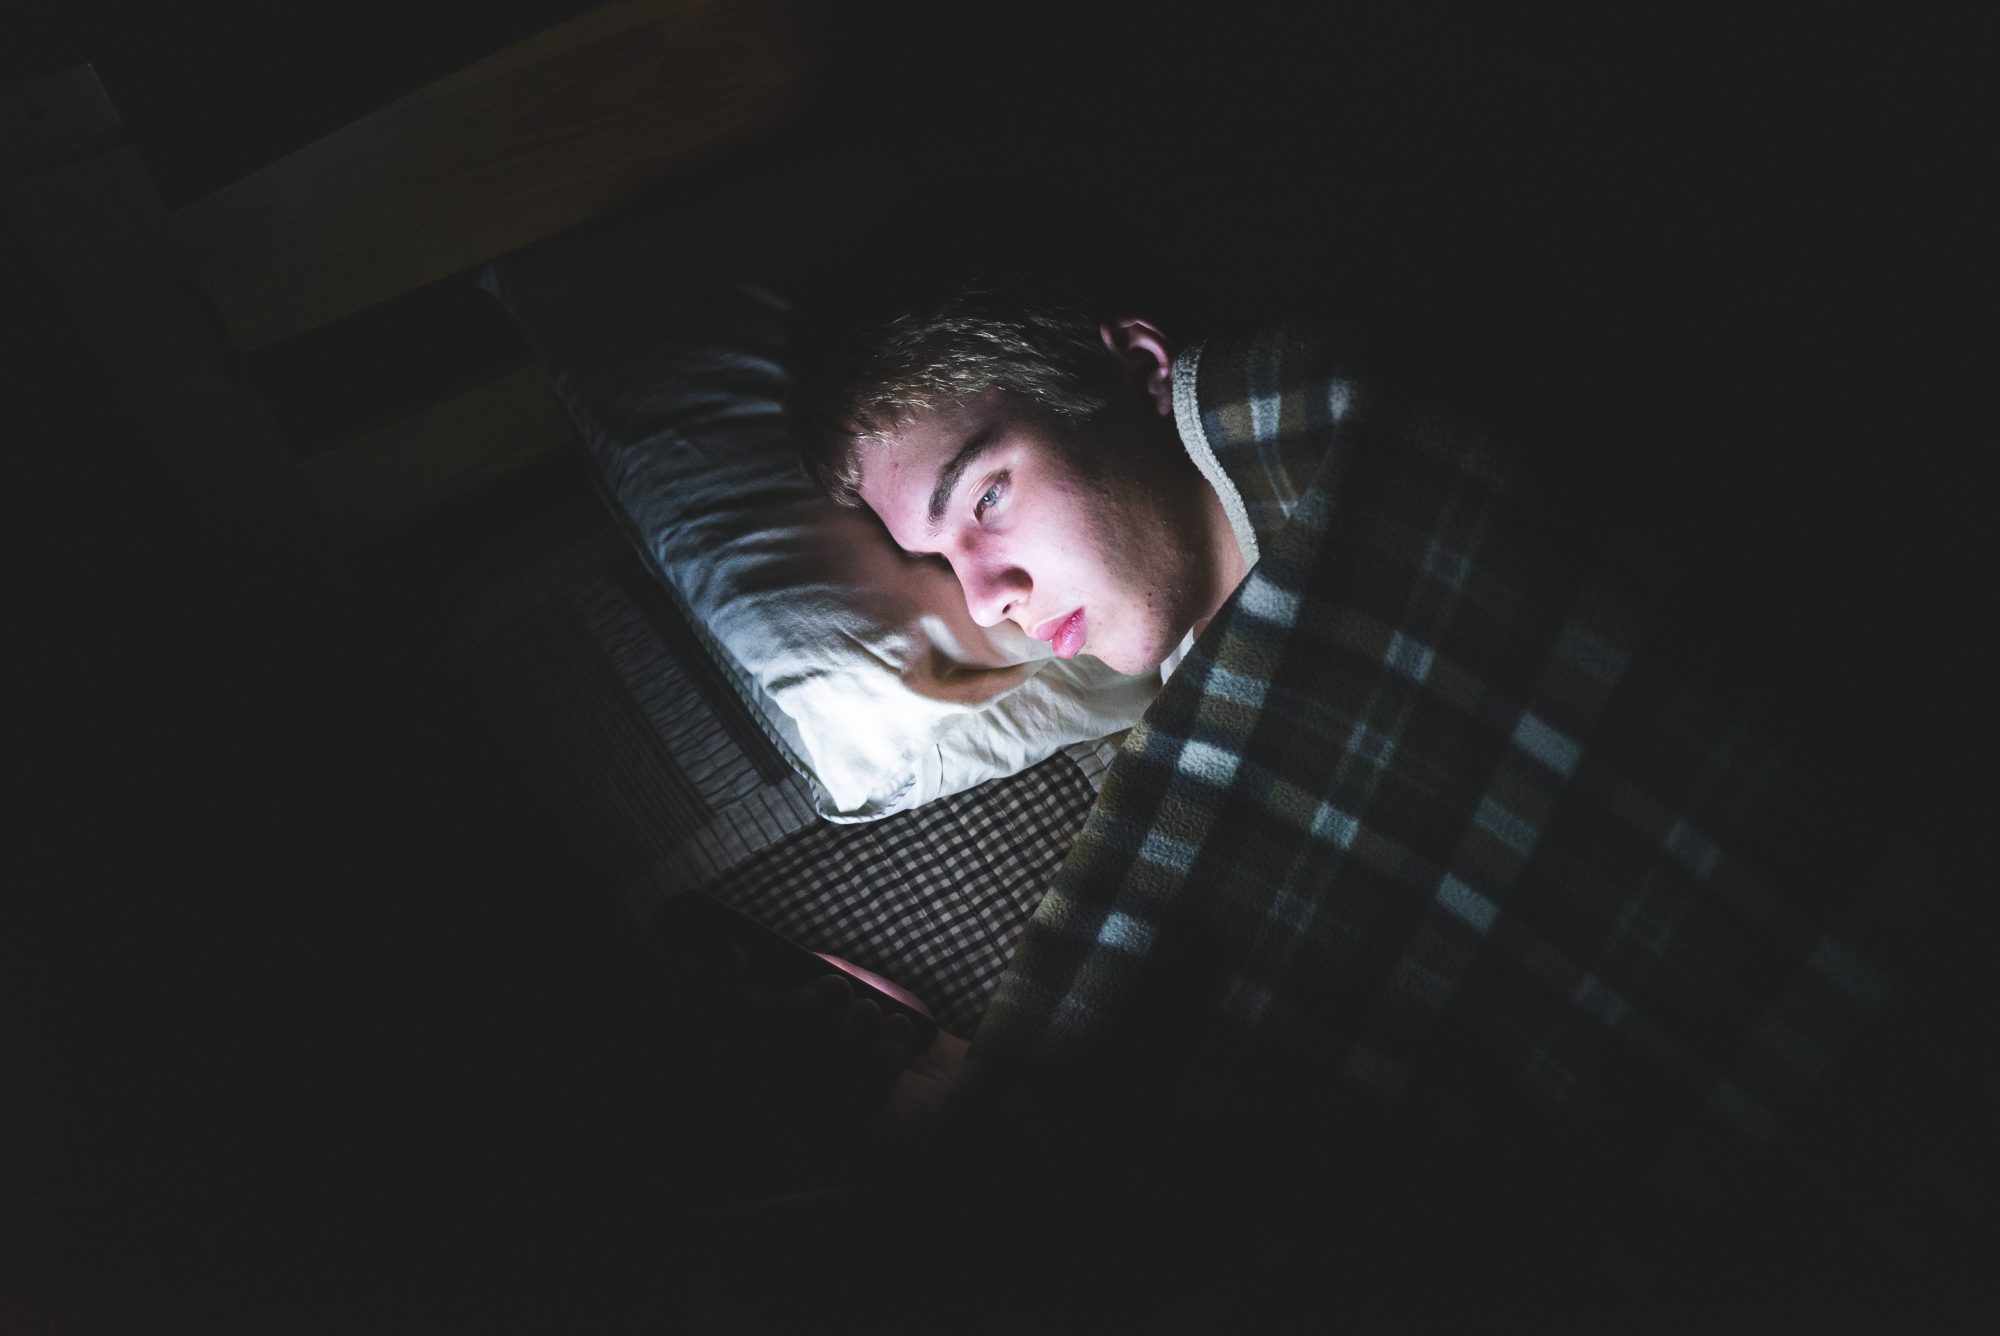 The image displays a depressed teenager browsing the internet on his mobile phone. He is lying on his bed in the dark.